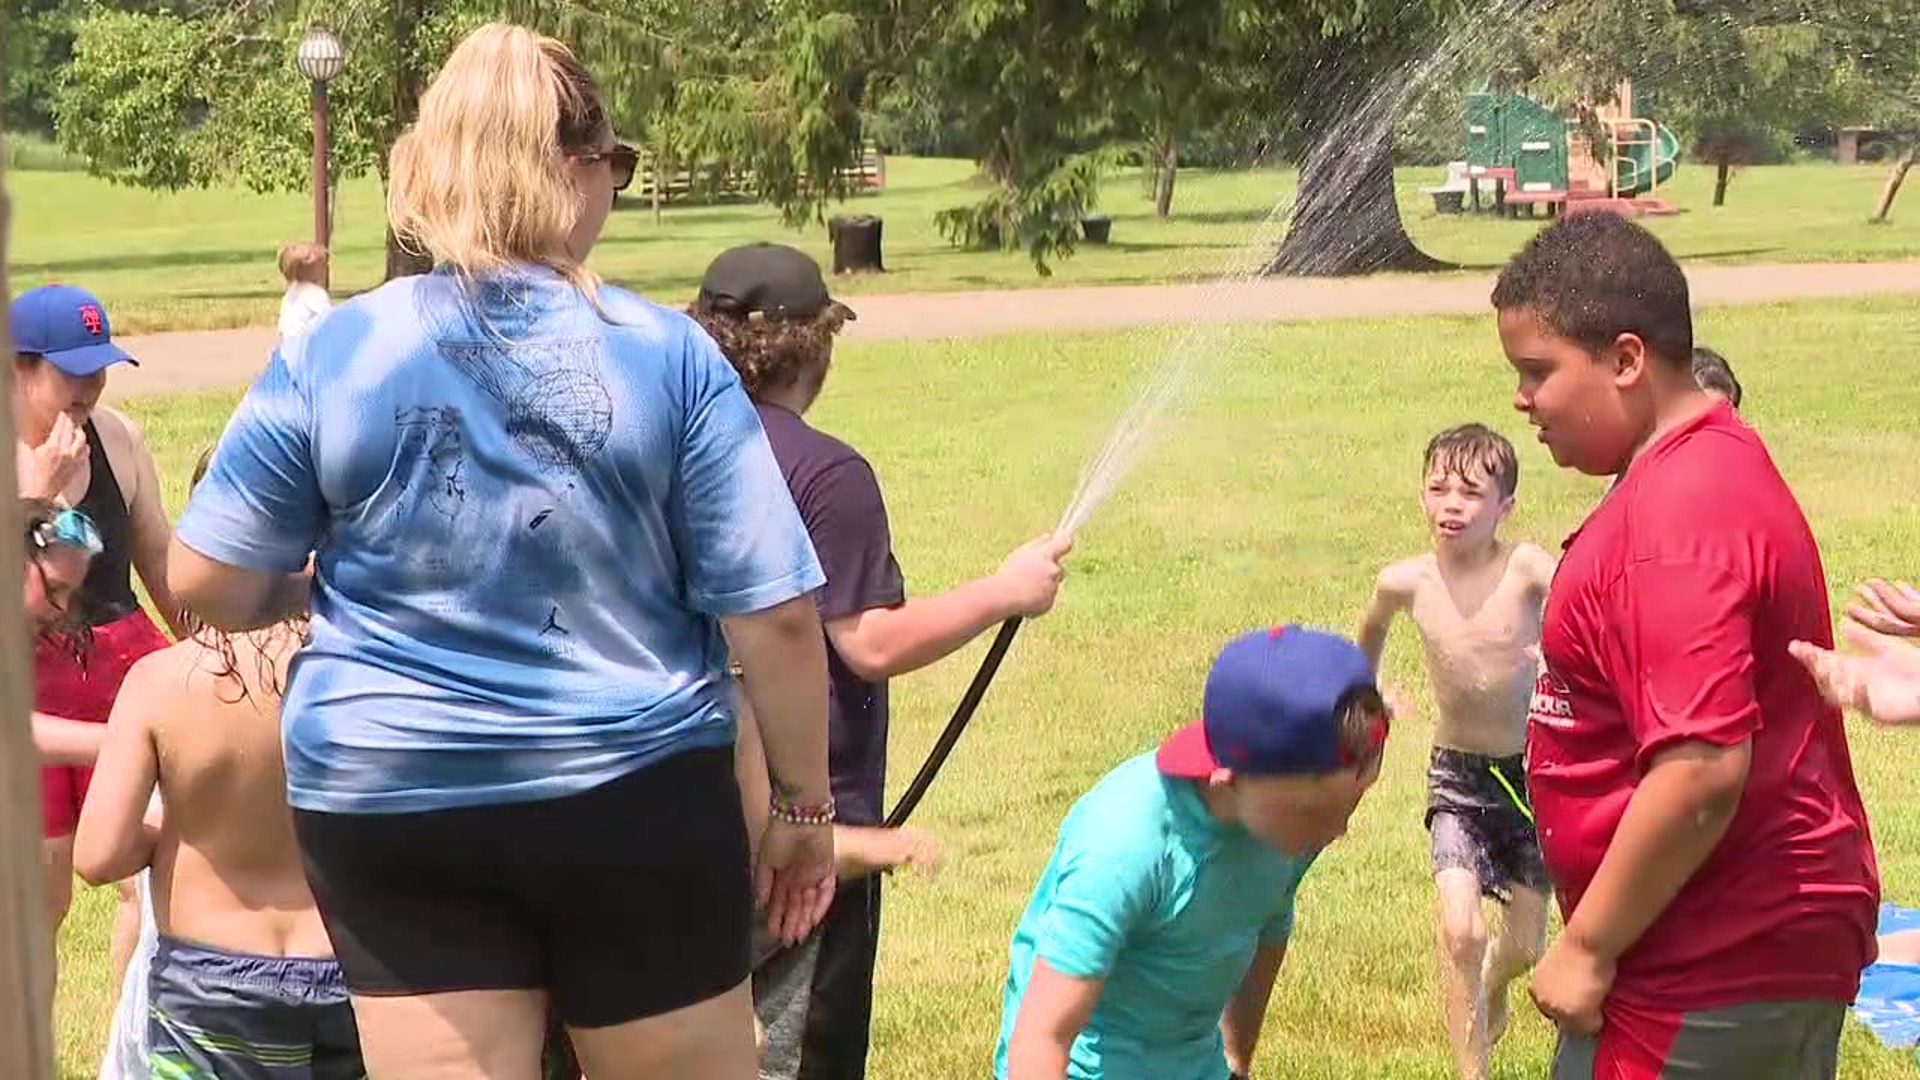 Summer camps around our area are filled with fun and games for children of all ages, but with temperatures like these, some activities are off-limits.